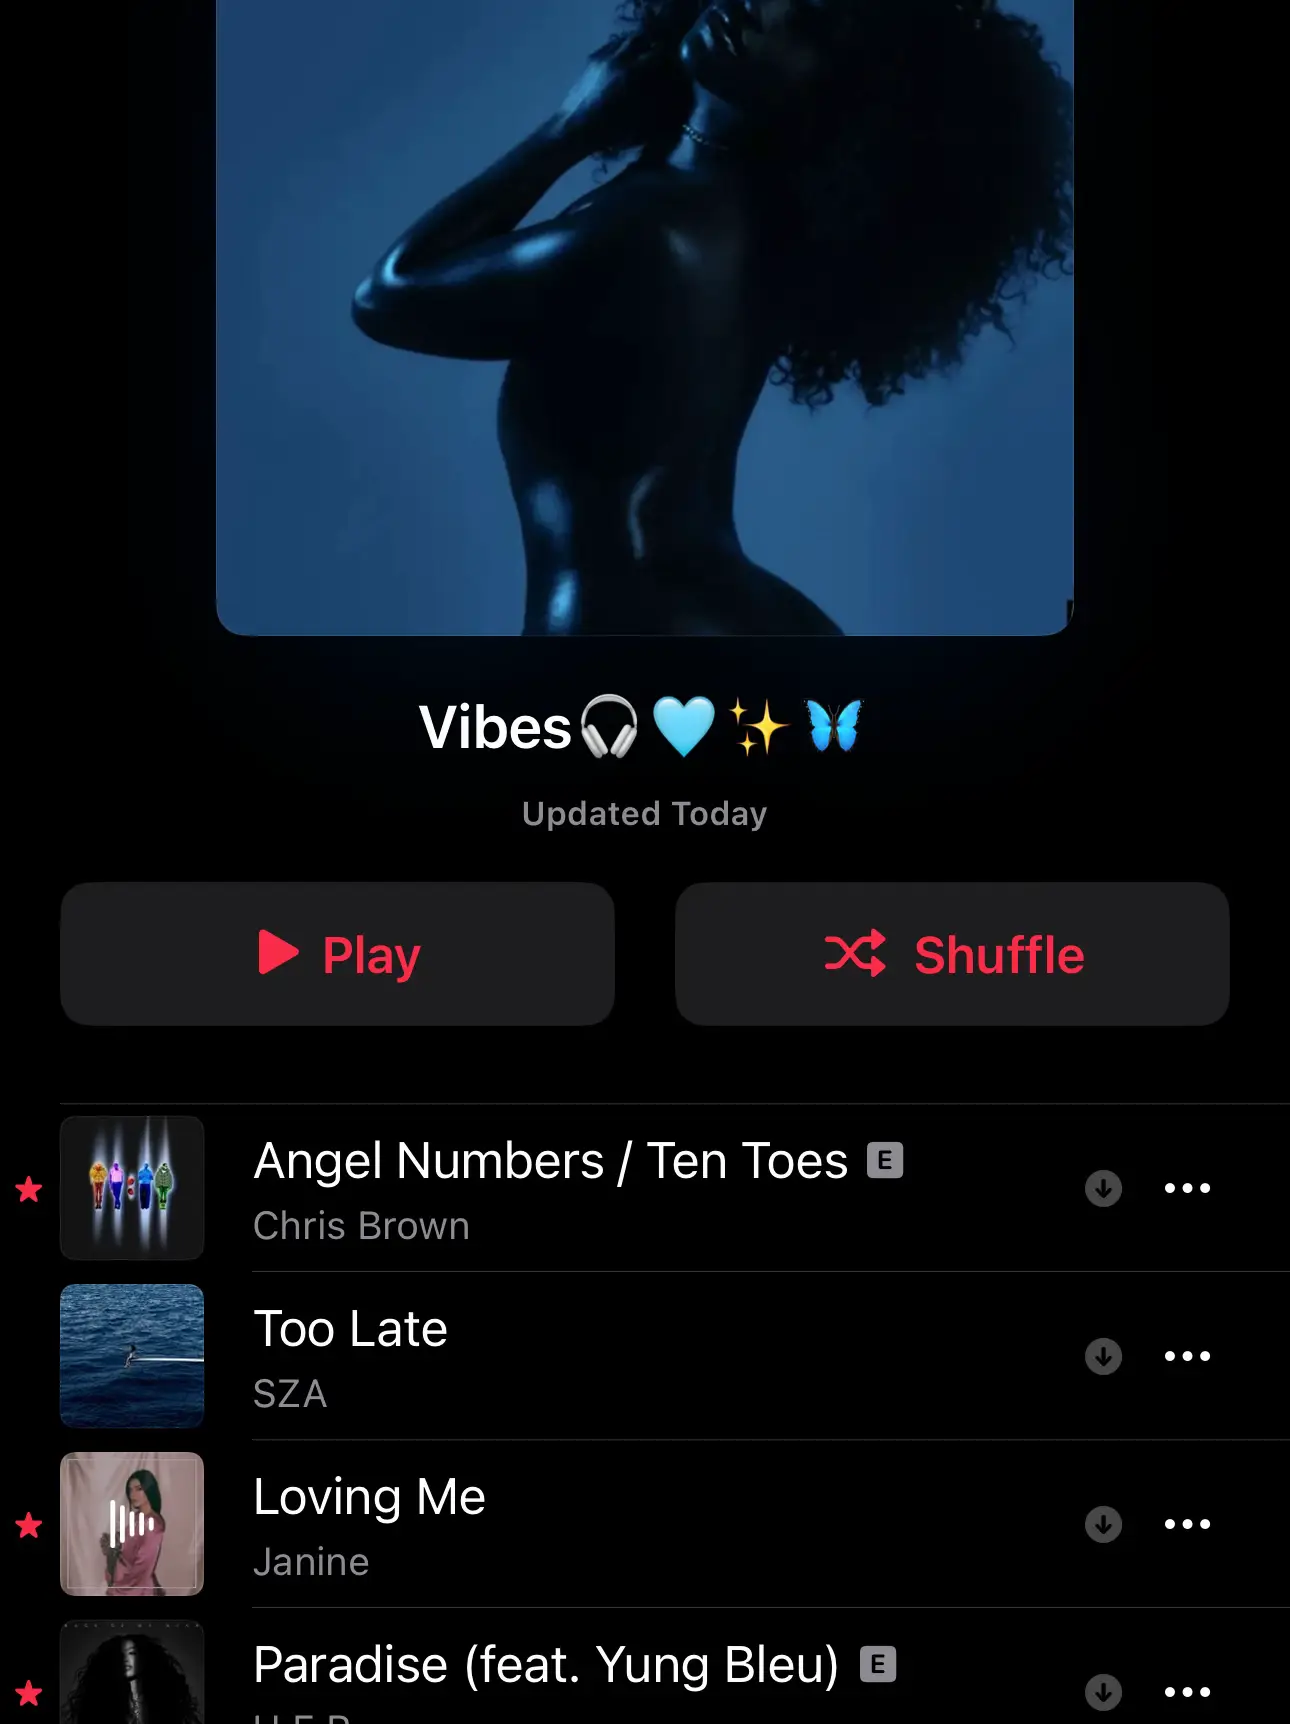  A list of music with a woman on the cover and the words "Vibes Updated Today"